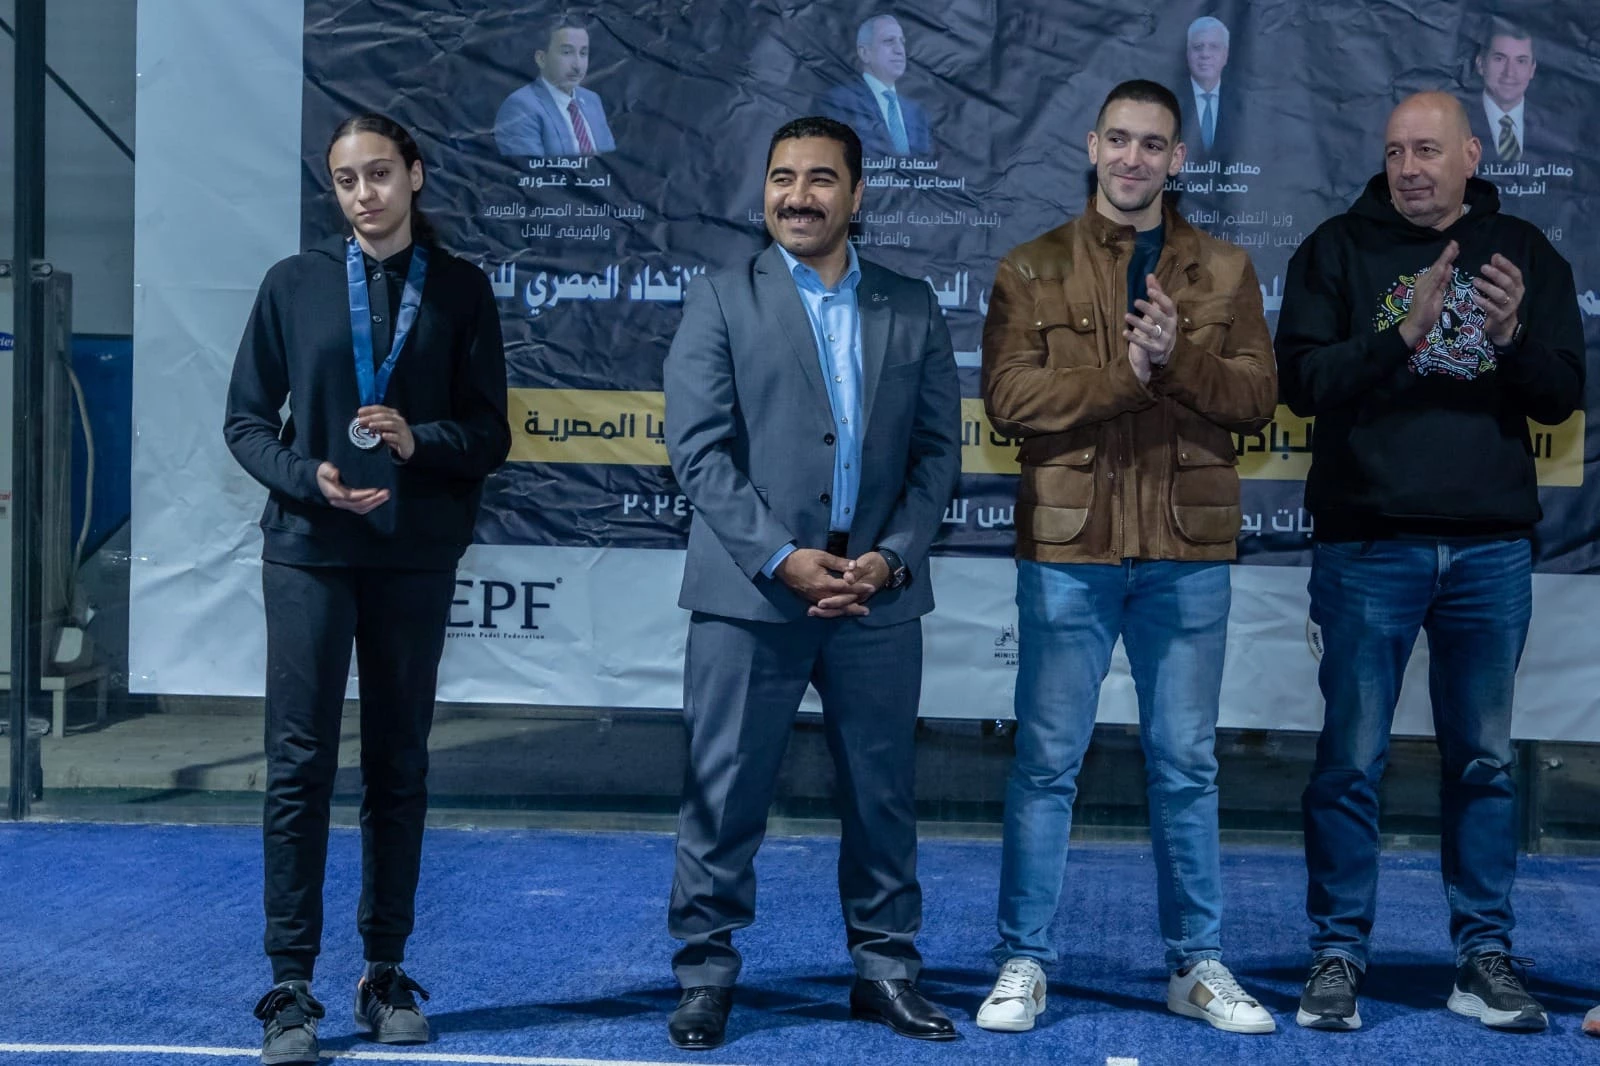 The Arab Academy organizes the first sports championship for Egyptian private universities in Padel sports